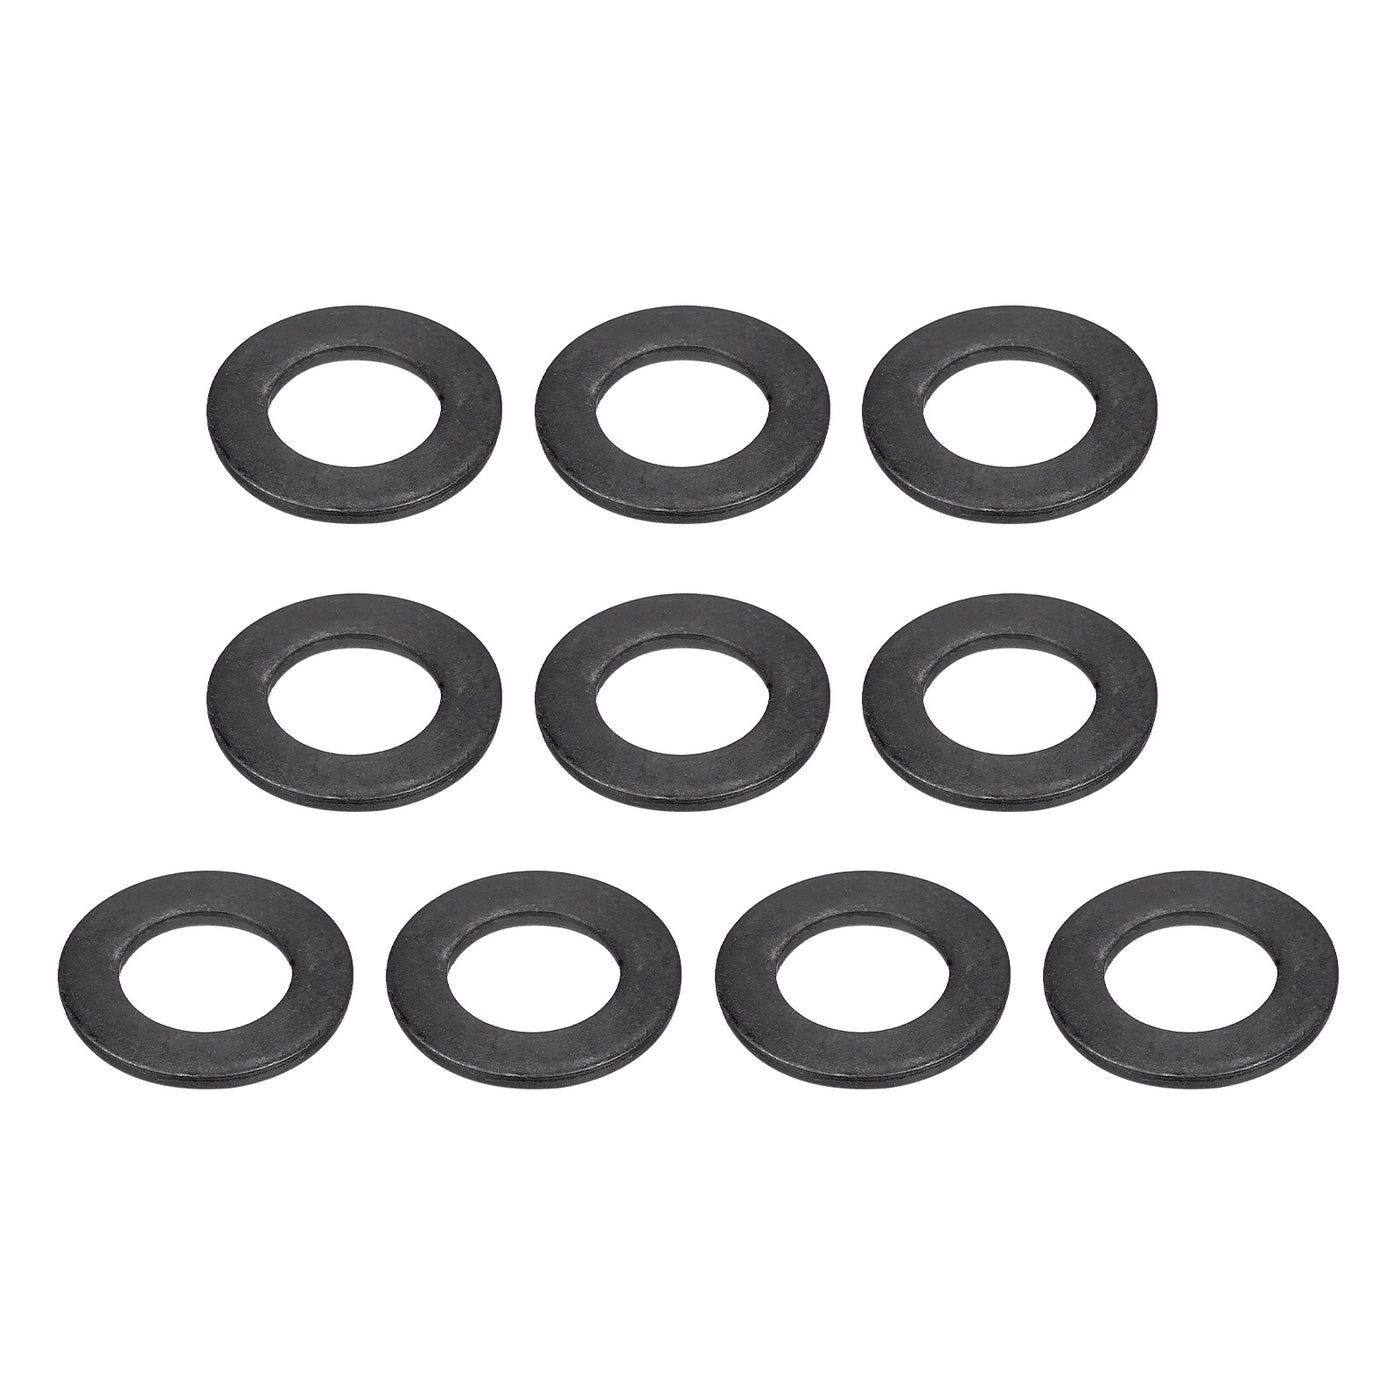 uxcell Uxcell M16 Carbon Steel Flat Washer 10pcs 17x29.5x2.8mm Grade 8.8 Alloy Steel Fasteners